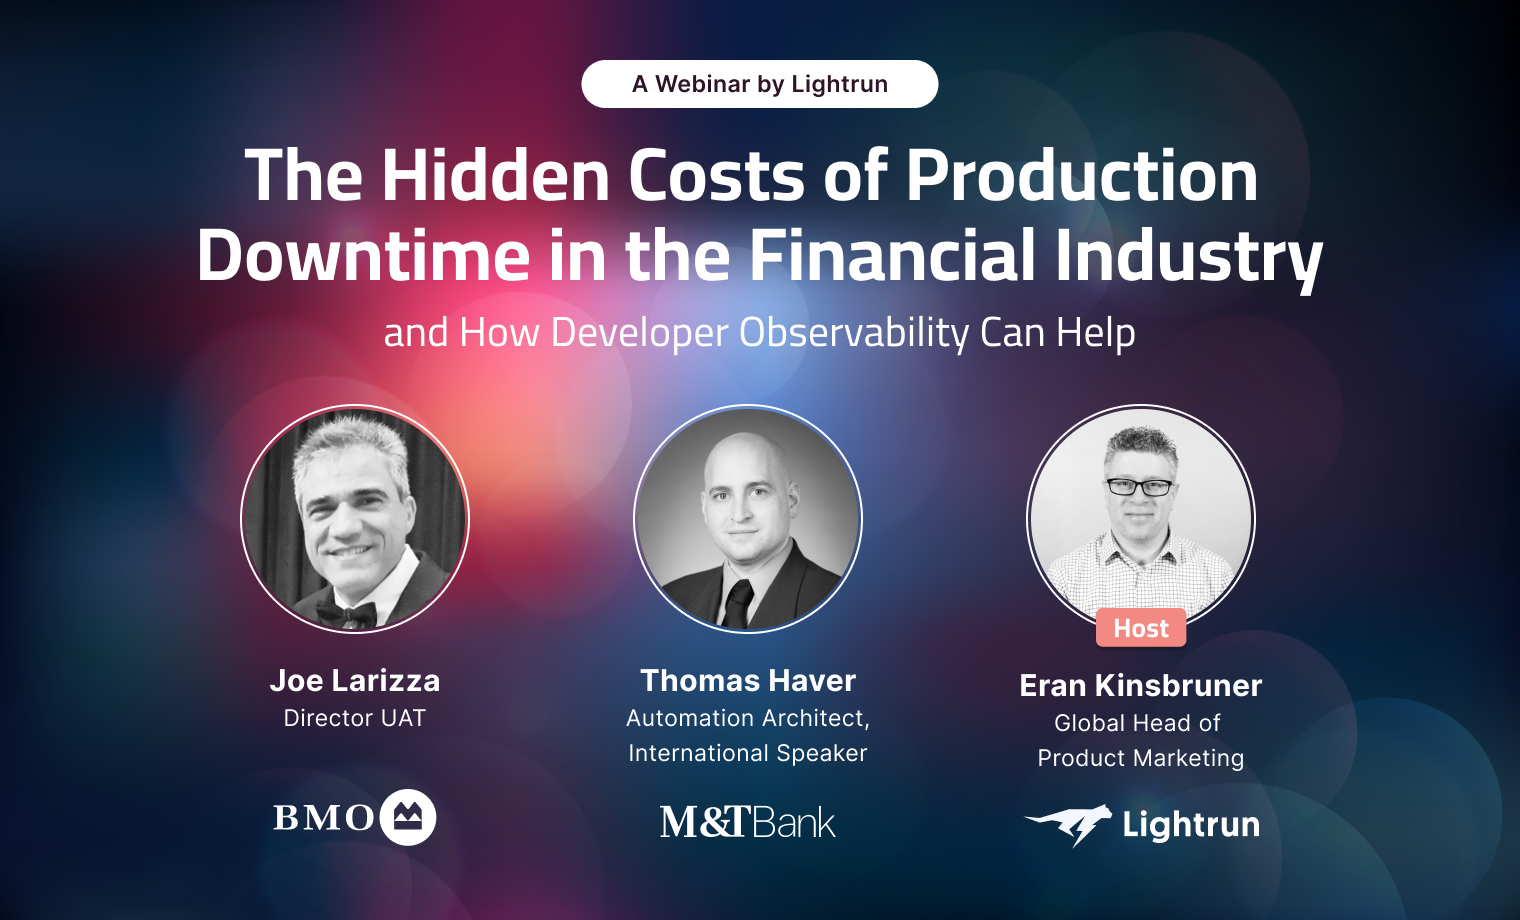 The Hidden Costs of Production Downtime in the Financial Industry